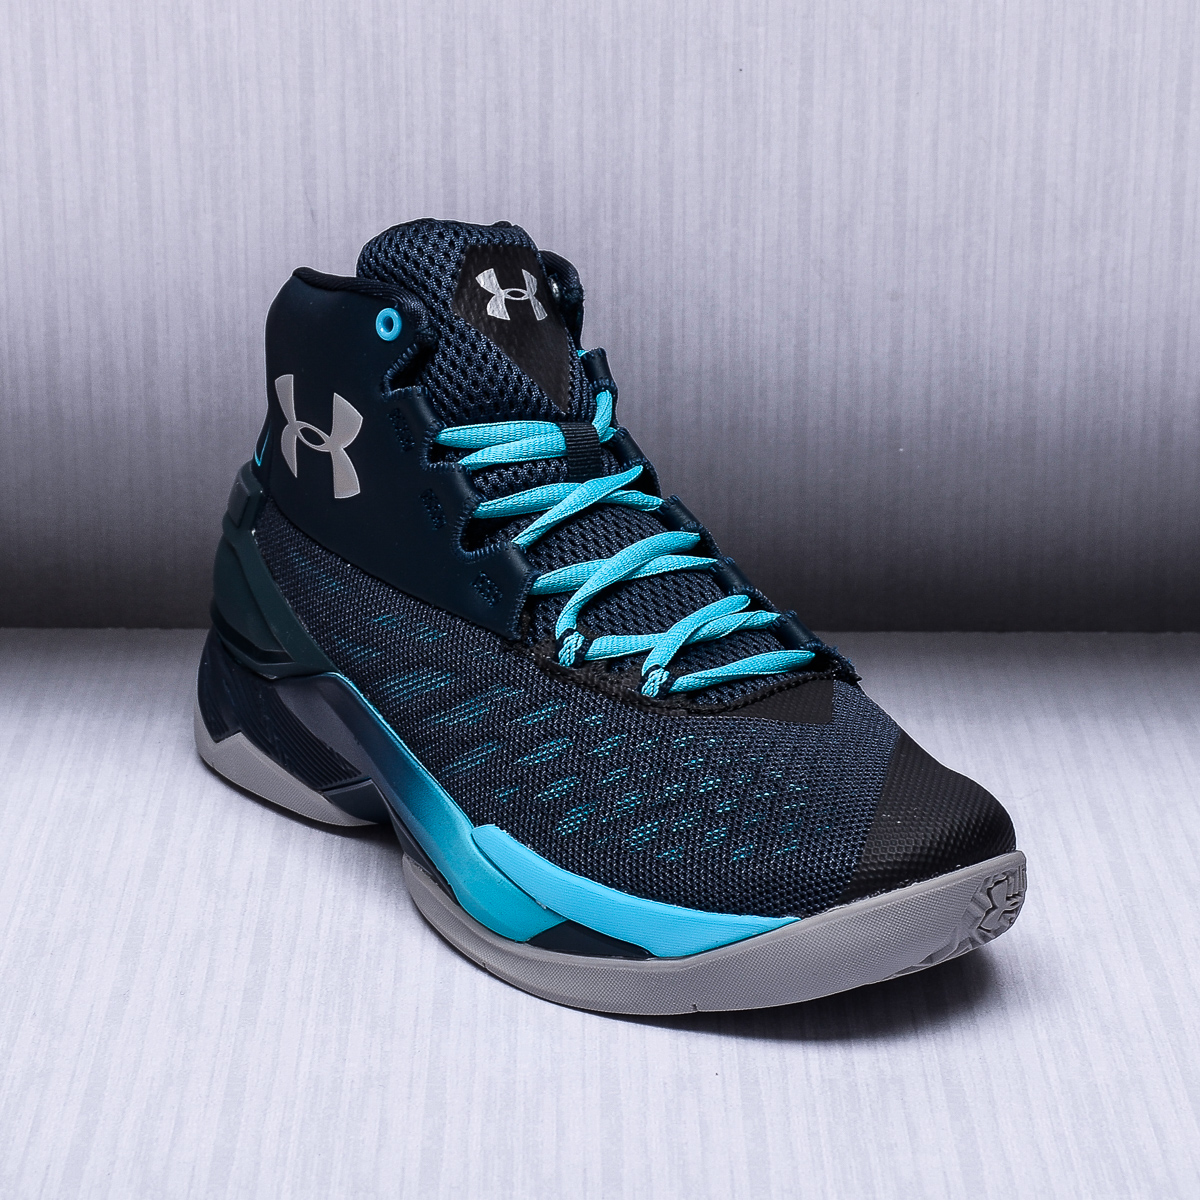 Cheap under armor basketball shoes Buy 